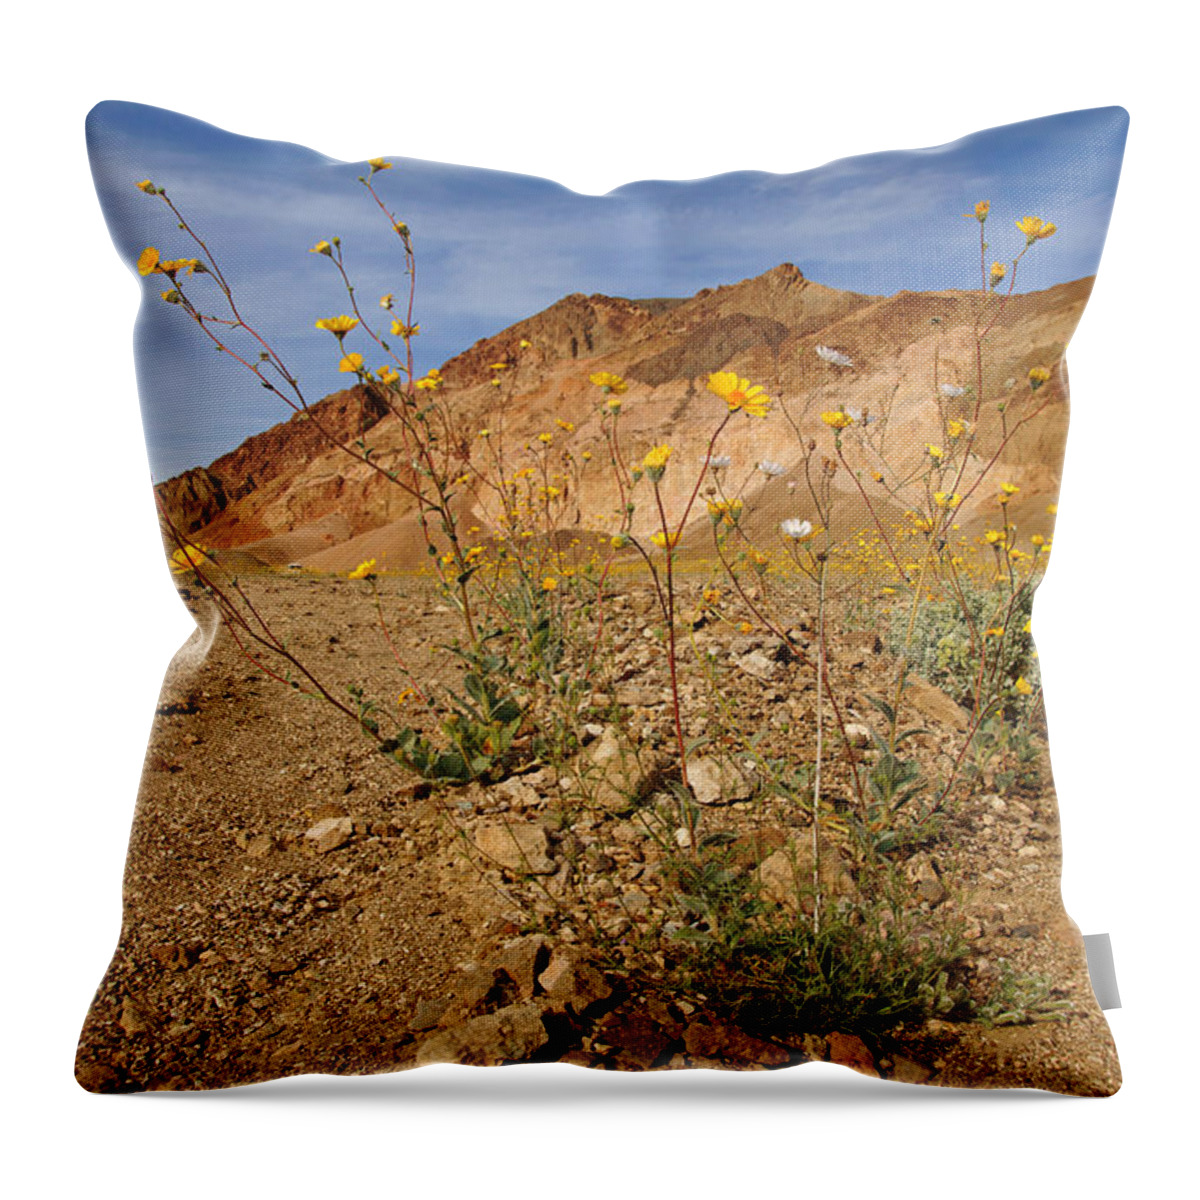 Superbloom 2016 Throw Pillow featuring the photograph Death Valley Superbloom 202 by Daniel Woodrum